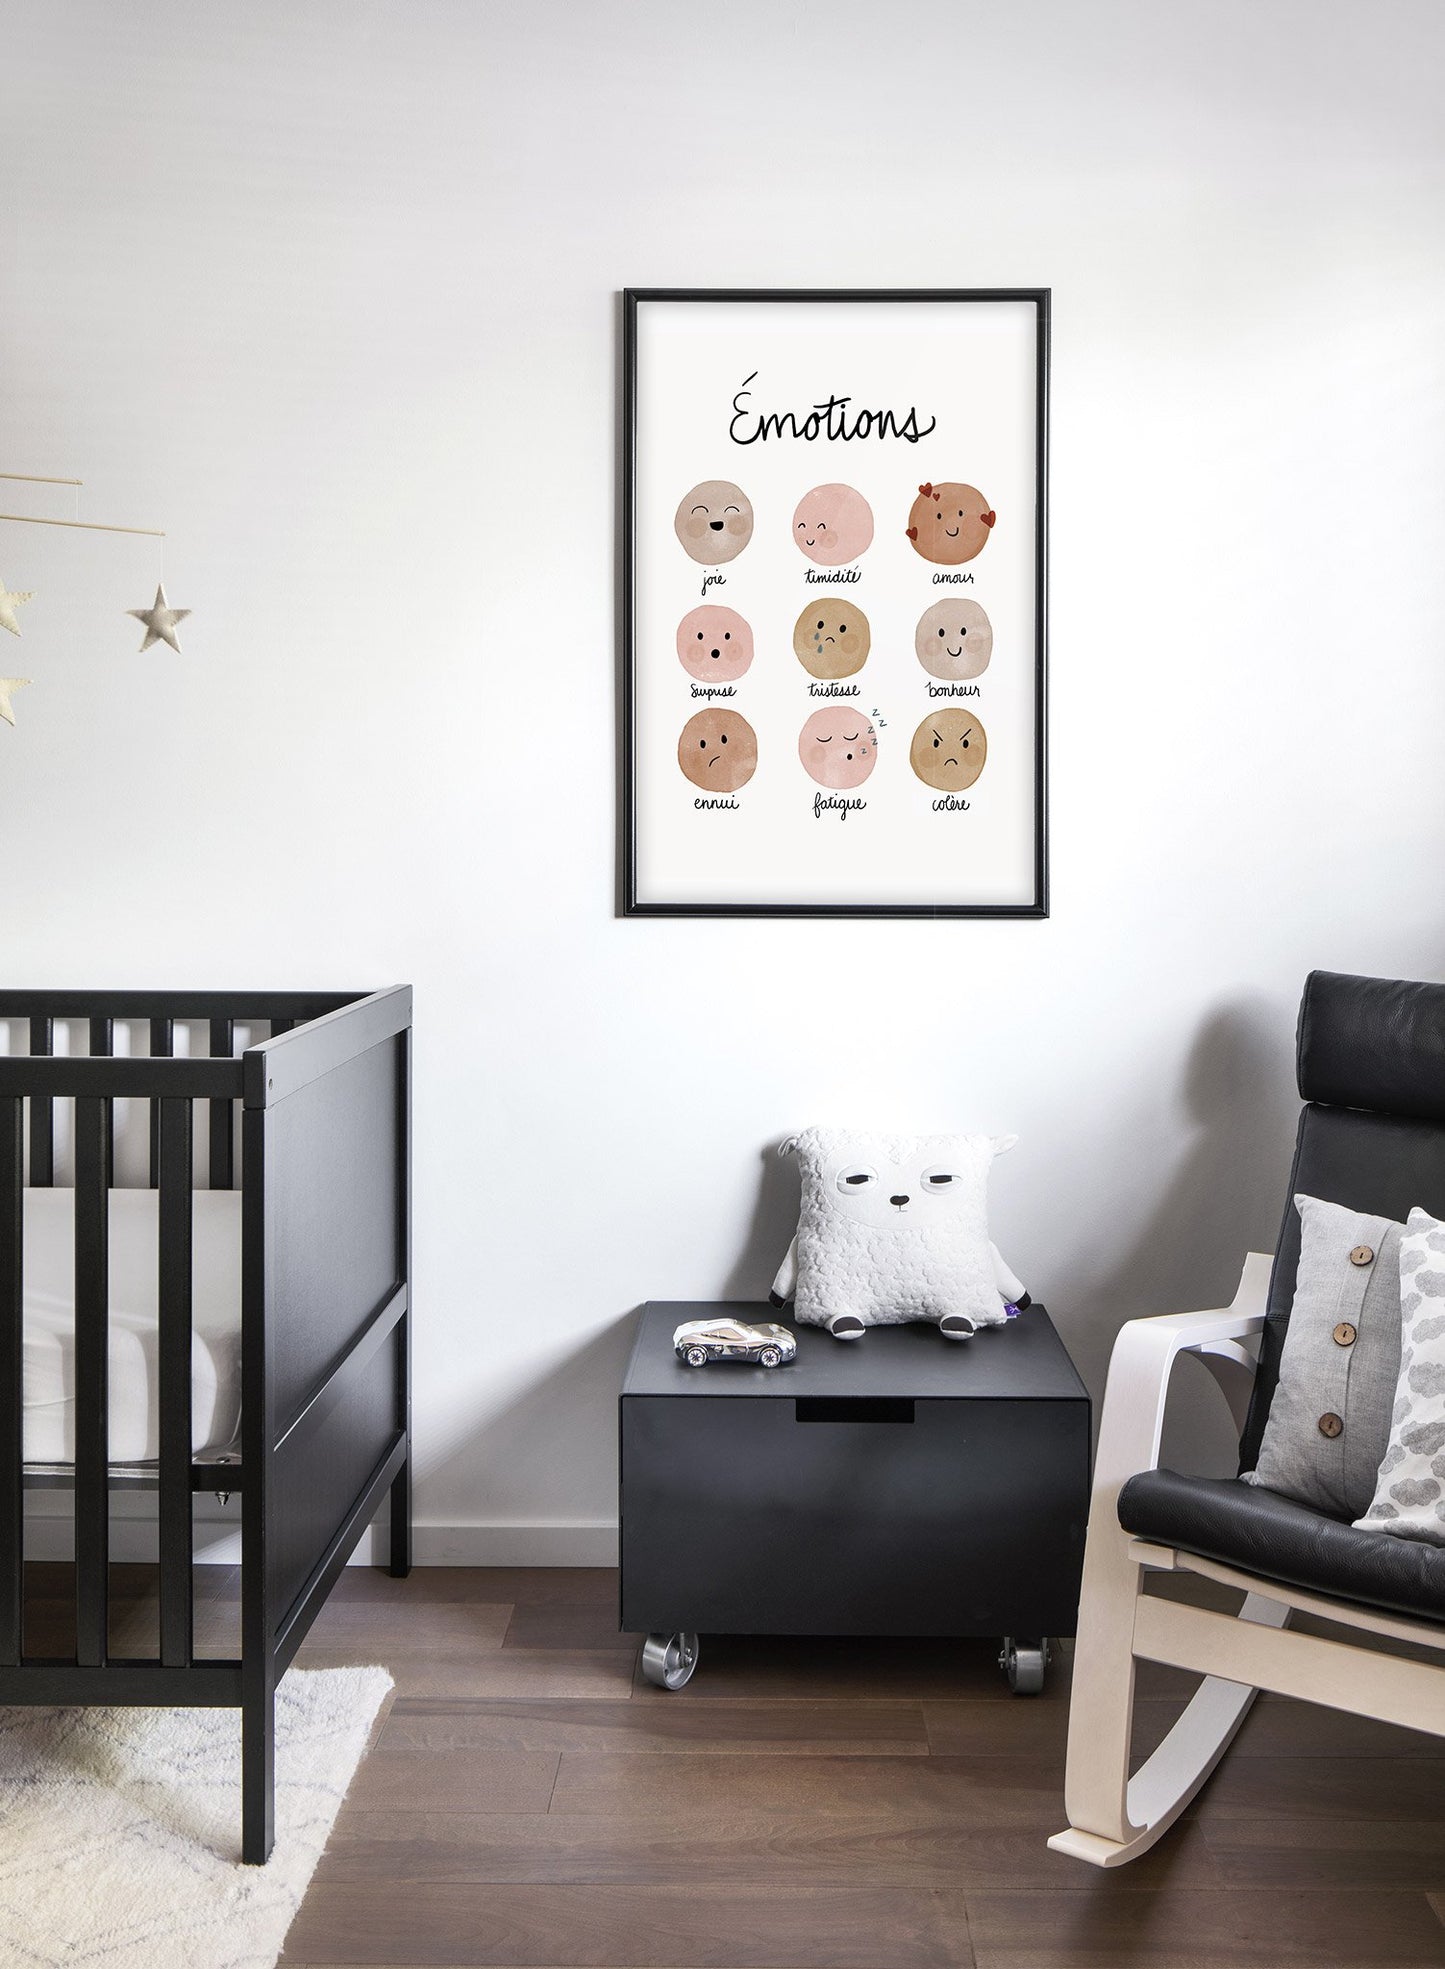 Kids nursery poster by Opposite Wall with facial emotions watercolours in French - Lifestyle - Kids Bedroom